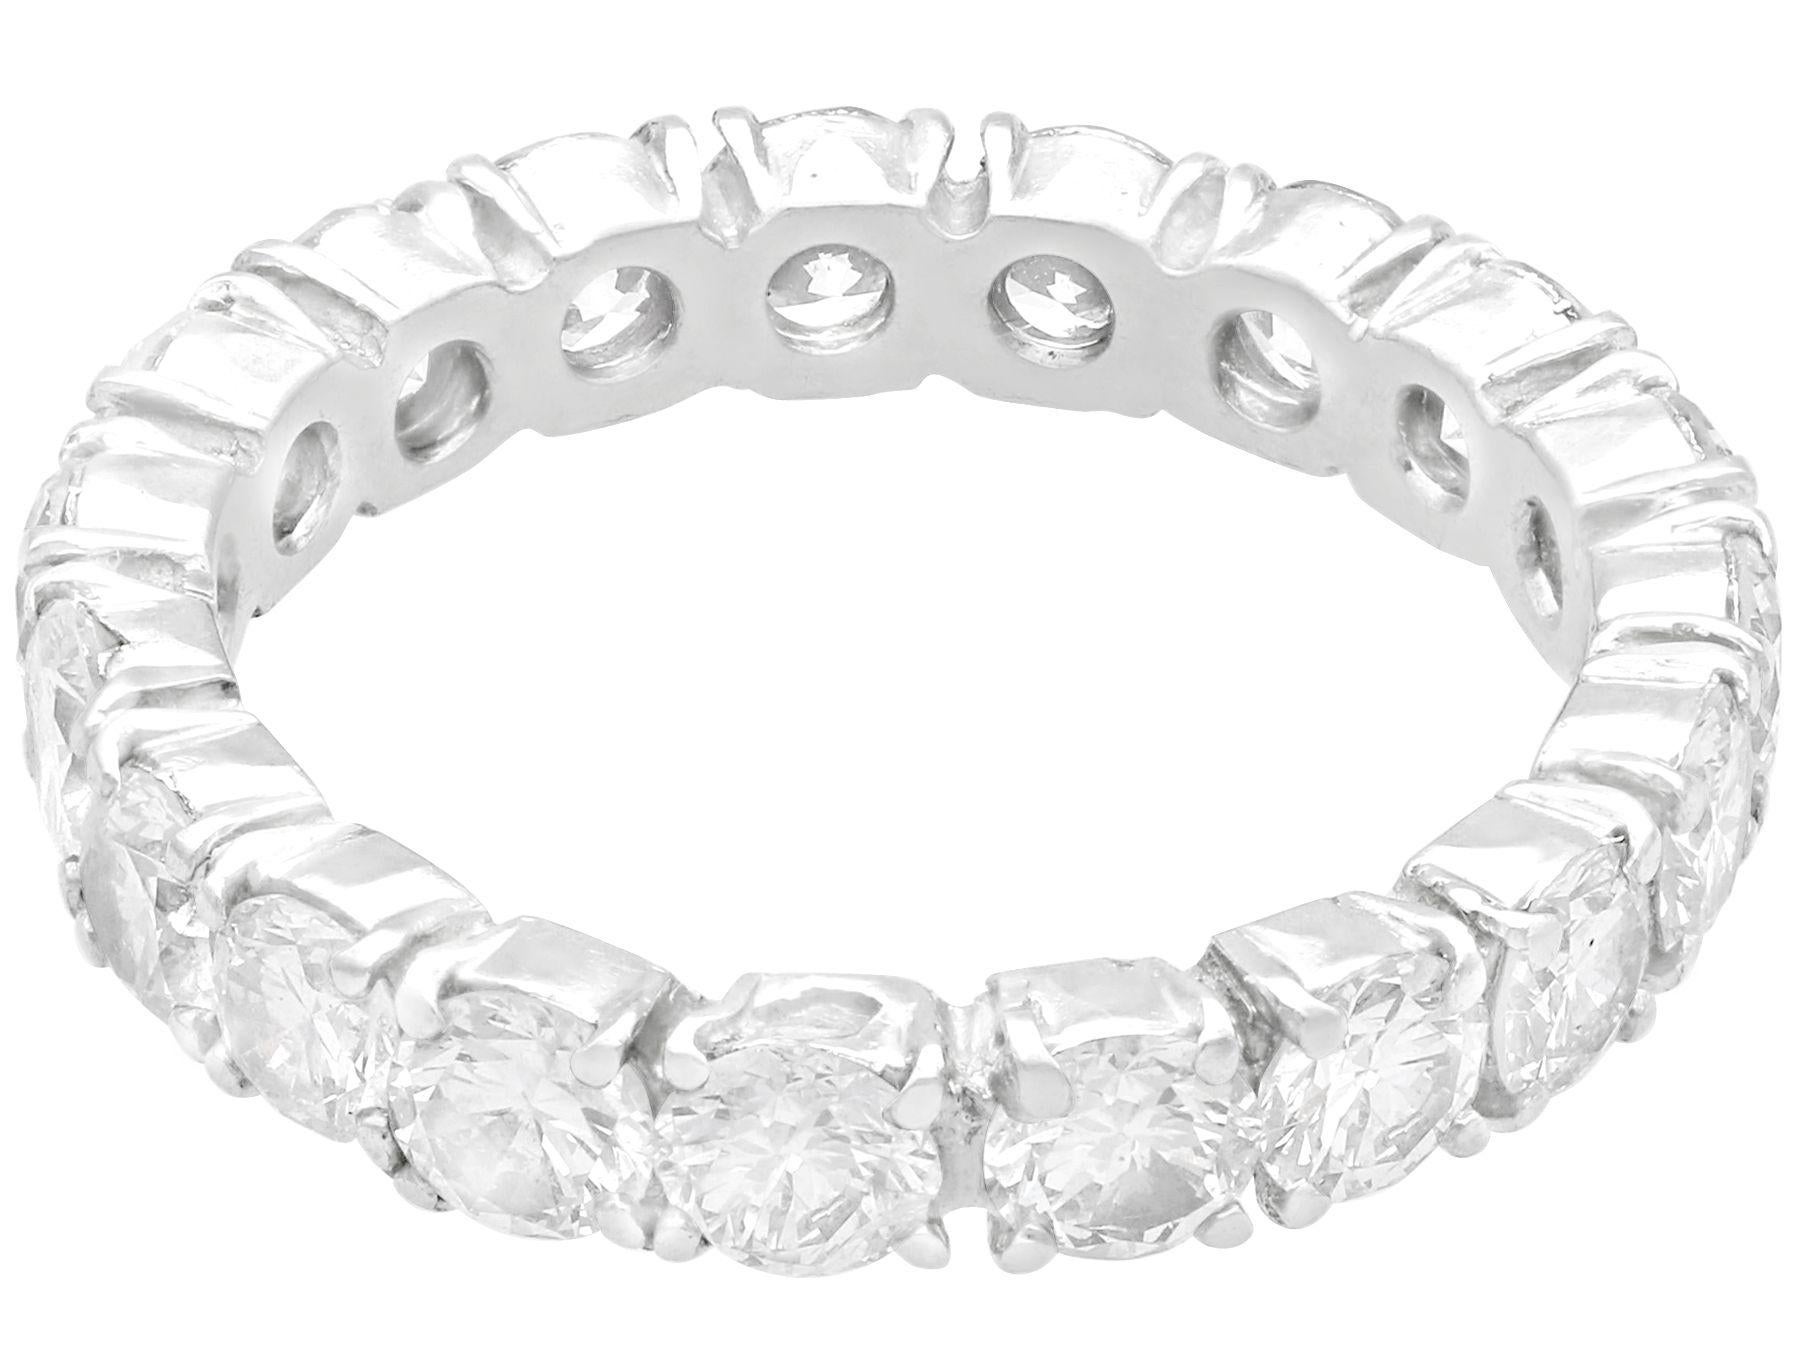 Vintage 2.57 Carat Diamond and Platinum Full Eternity Ring, Circa 1950 In Excellent Condition For Sale In Jesmond, Newcastle Upon Tyne